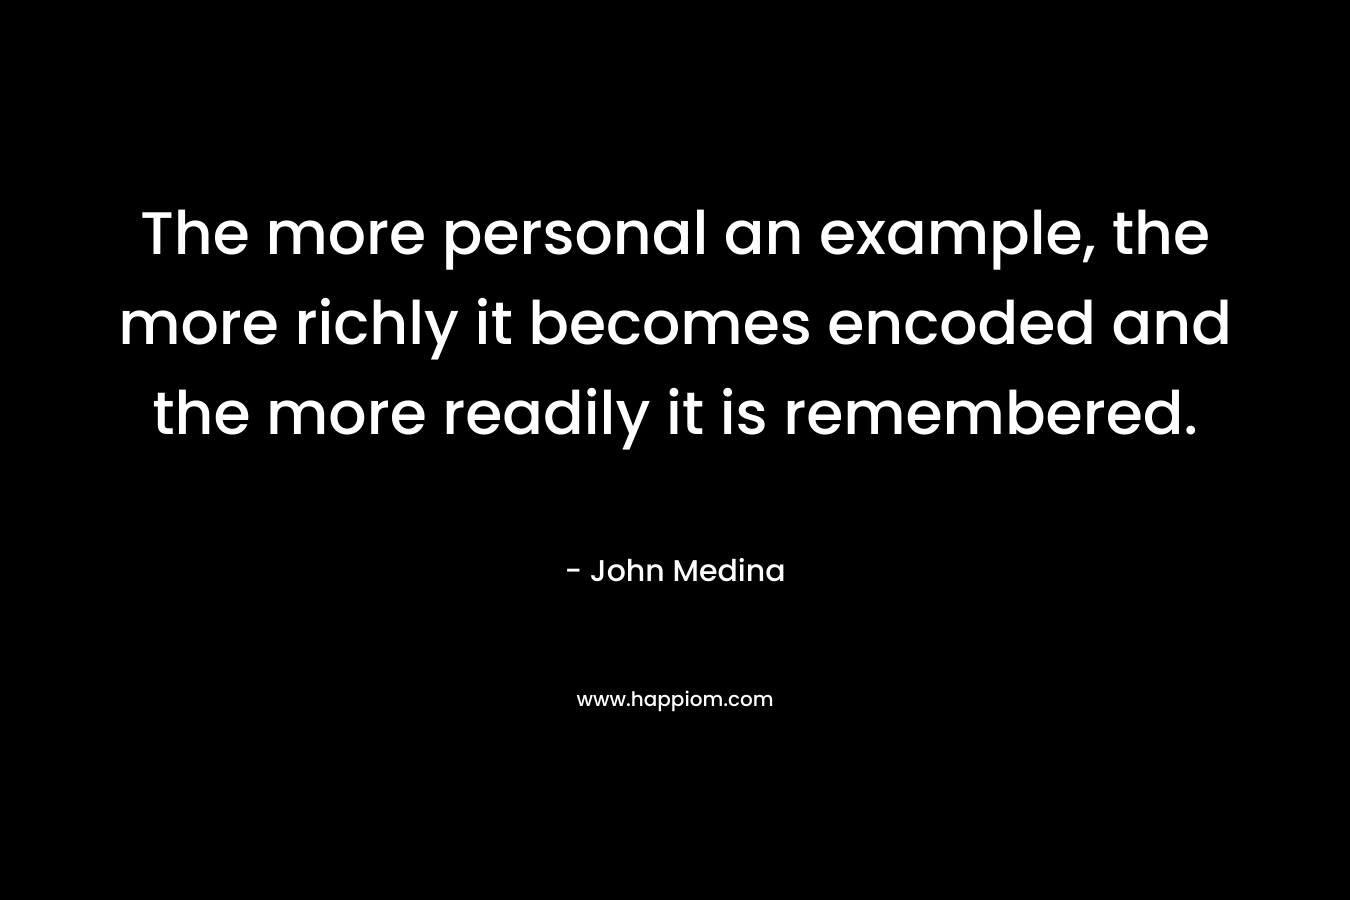 The more personal an example, the more richly it becomes encoded and the more readily it is remembered.